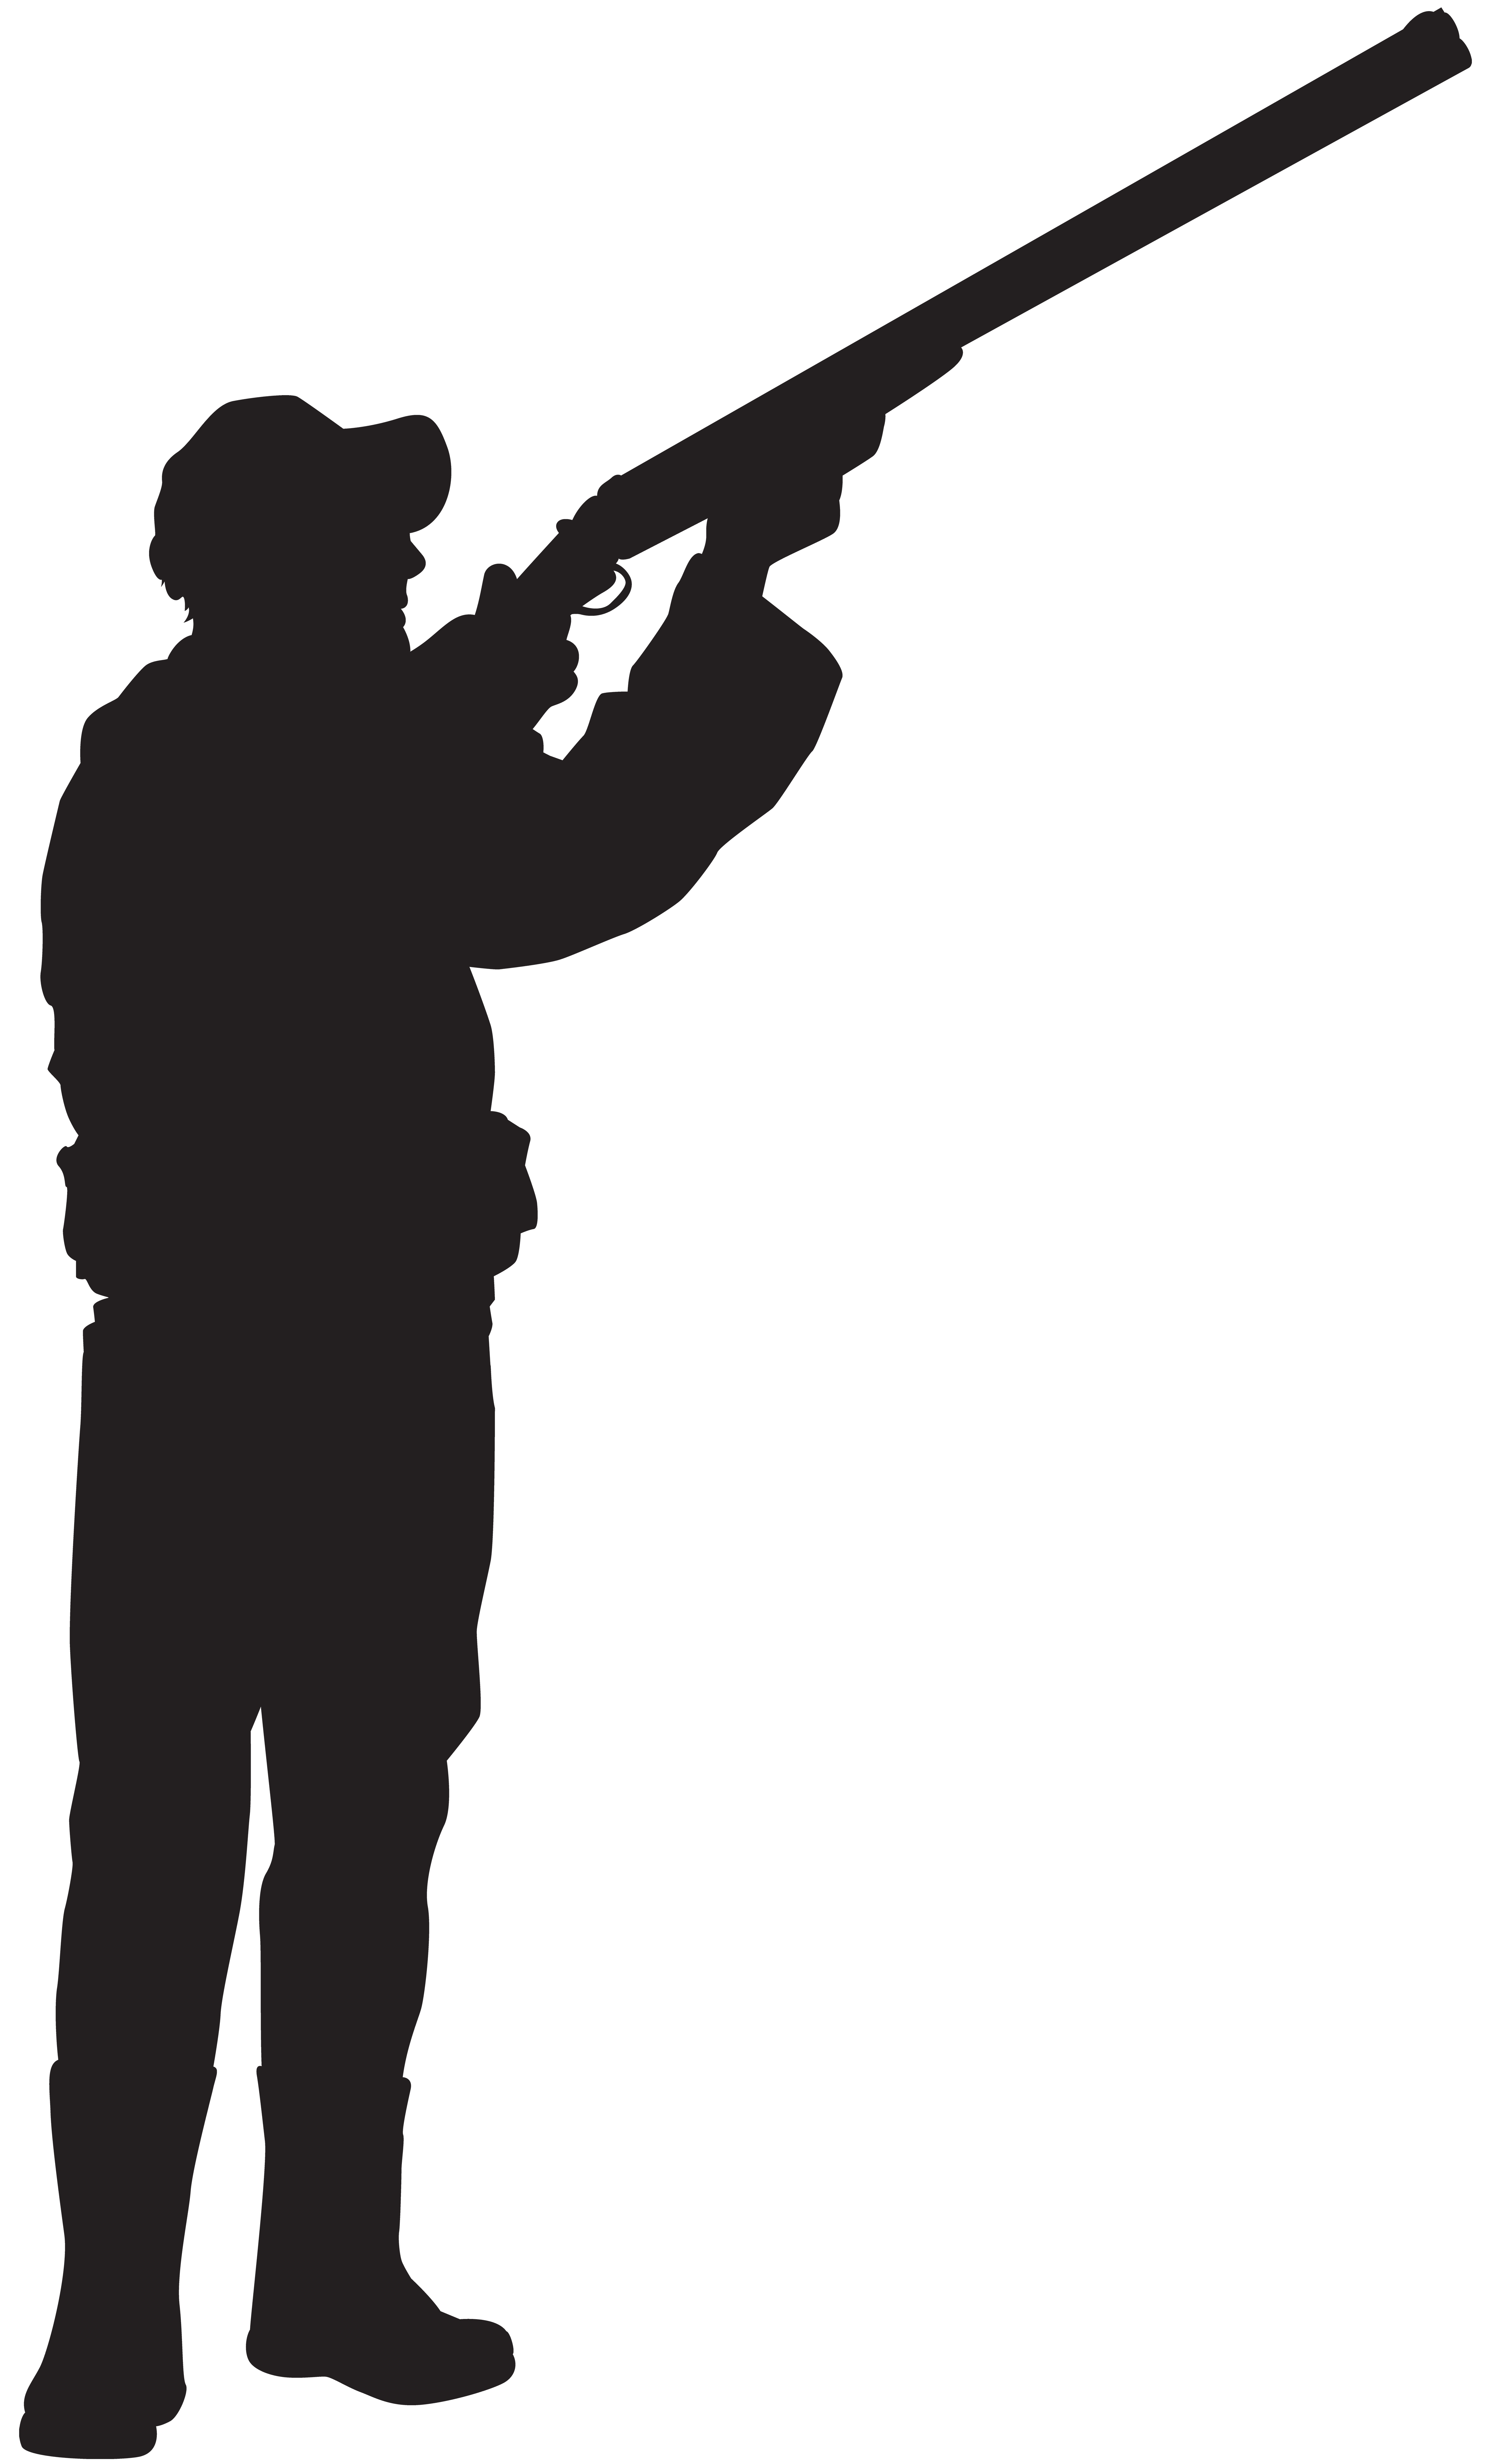 Hunter Silhouette PNG Clip Art Image.